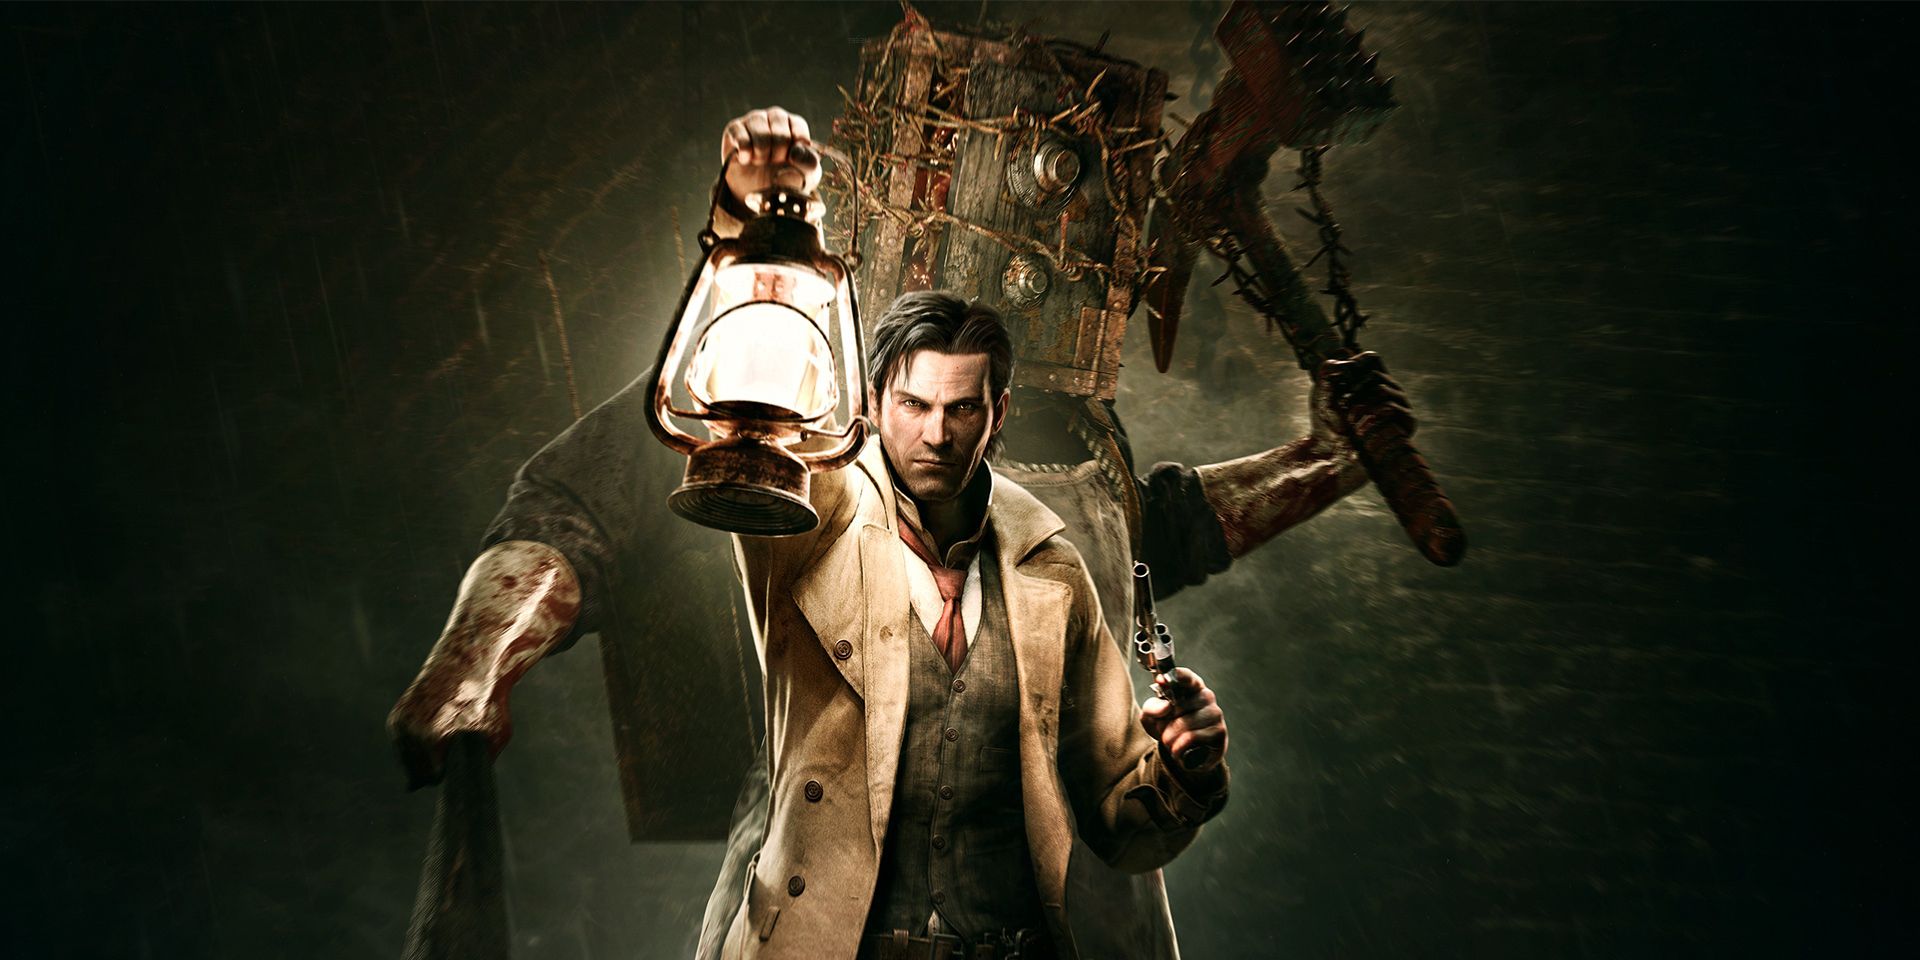 Promotional art of Sabastian Castellanos from The Evil Within video game.